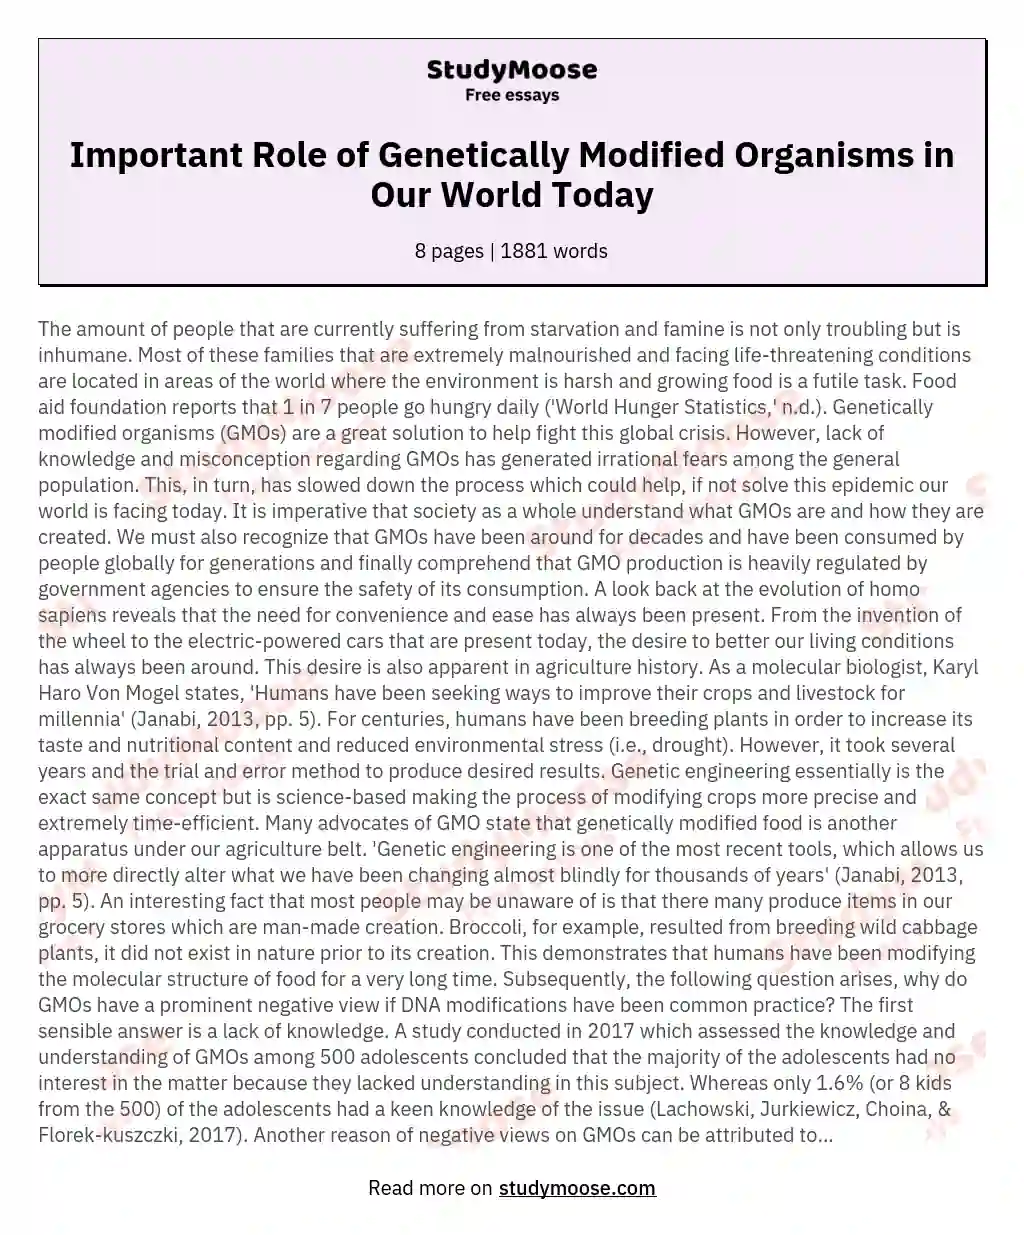 Important Role of Genetically Modified Organisms in Our World Today